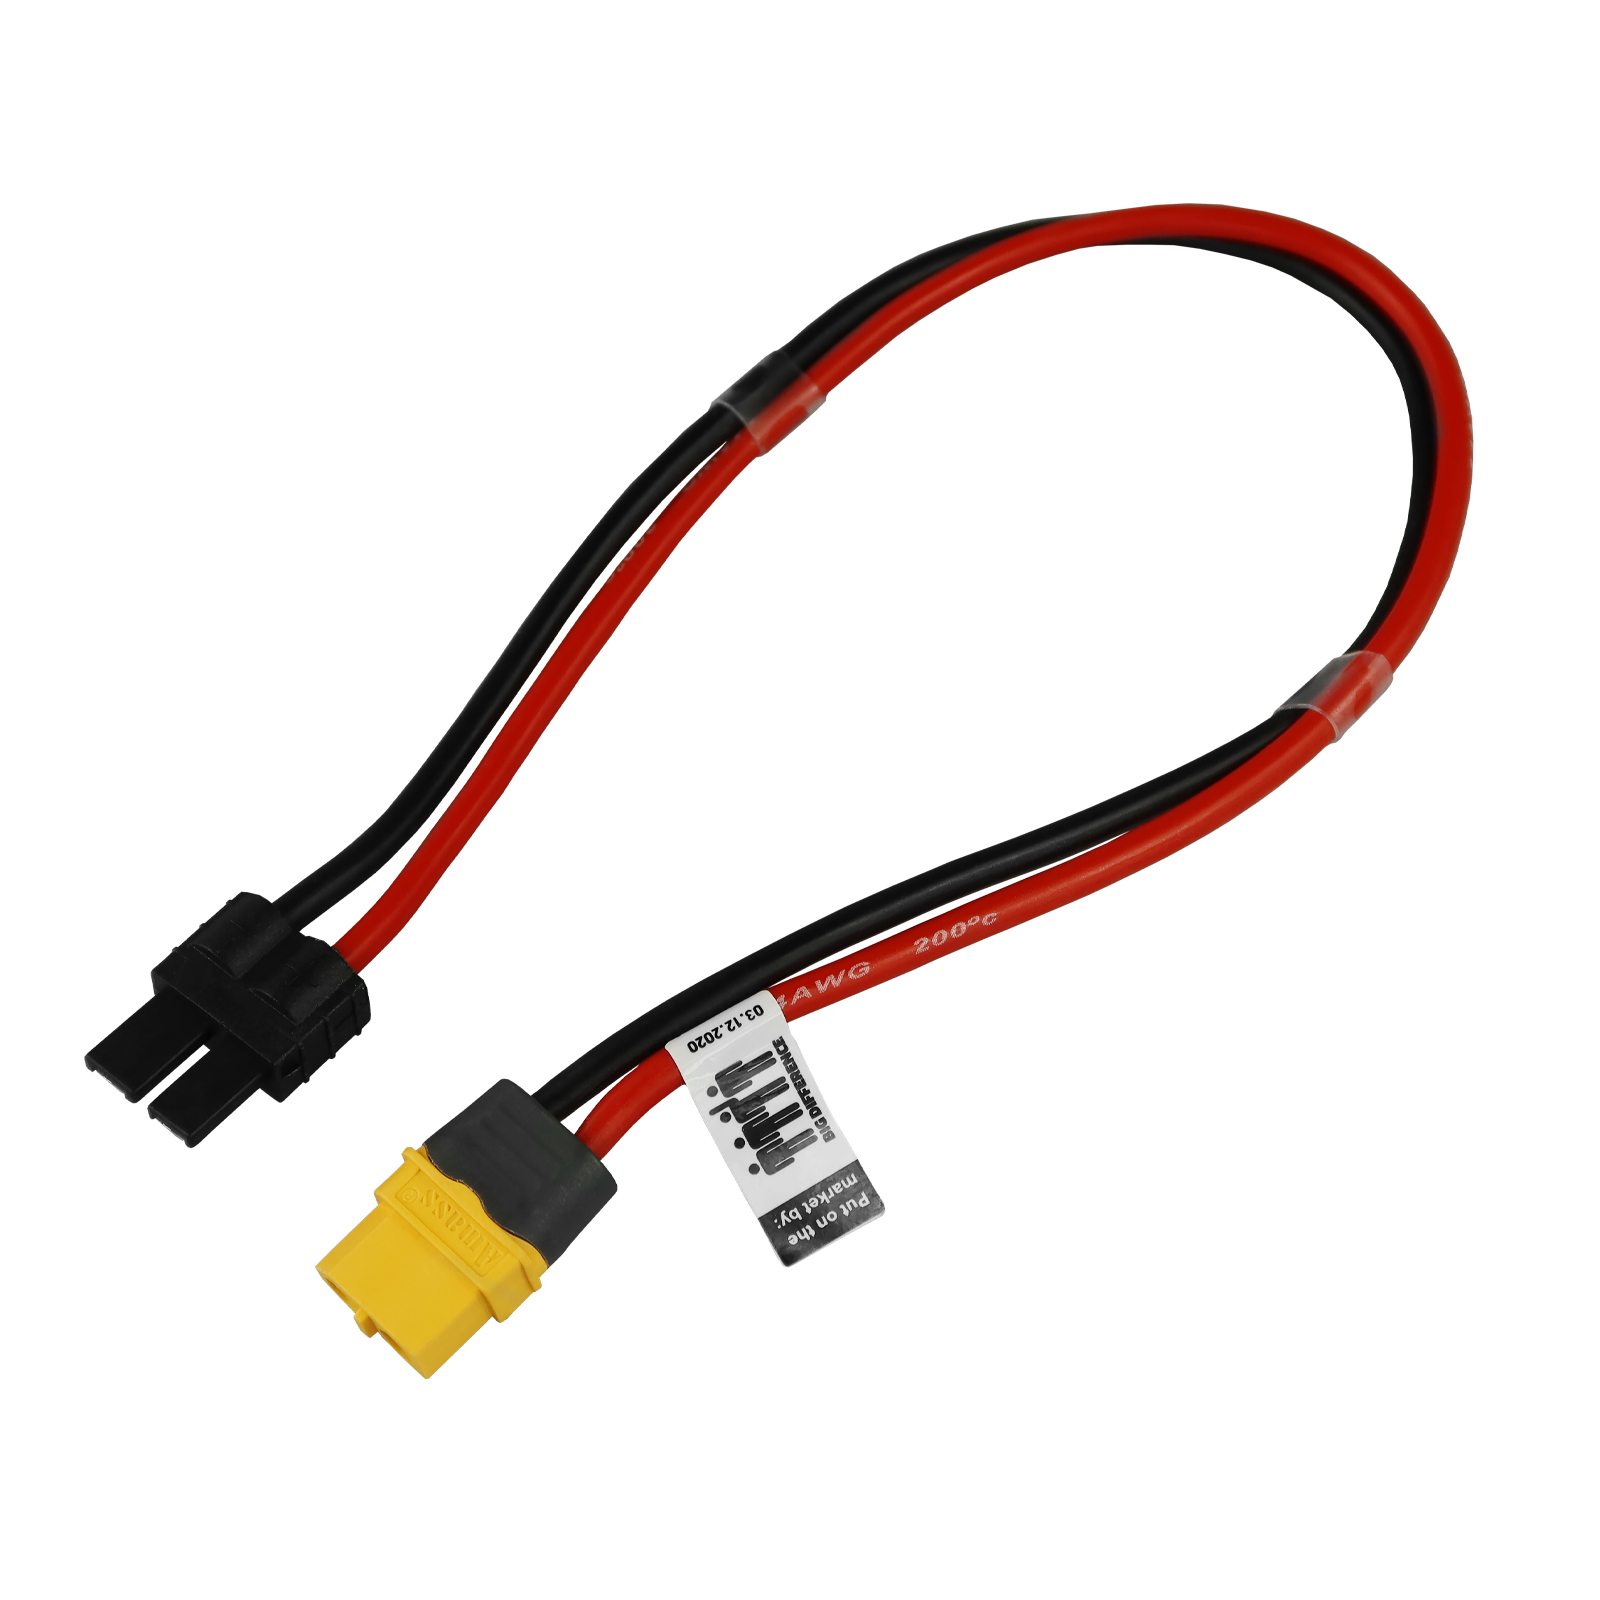 CHARGING CABLE 2.5MM2, 30CM, TRAXXAS CONNECTOR, XT60 FEMALE INPUT